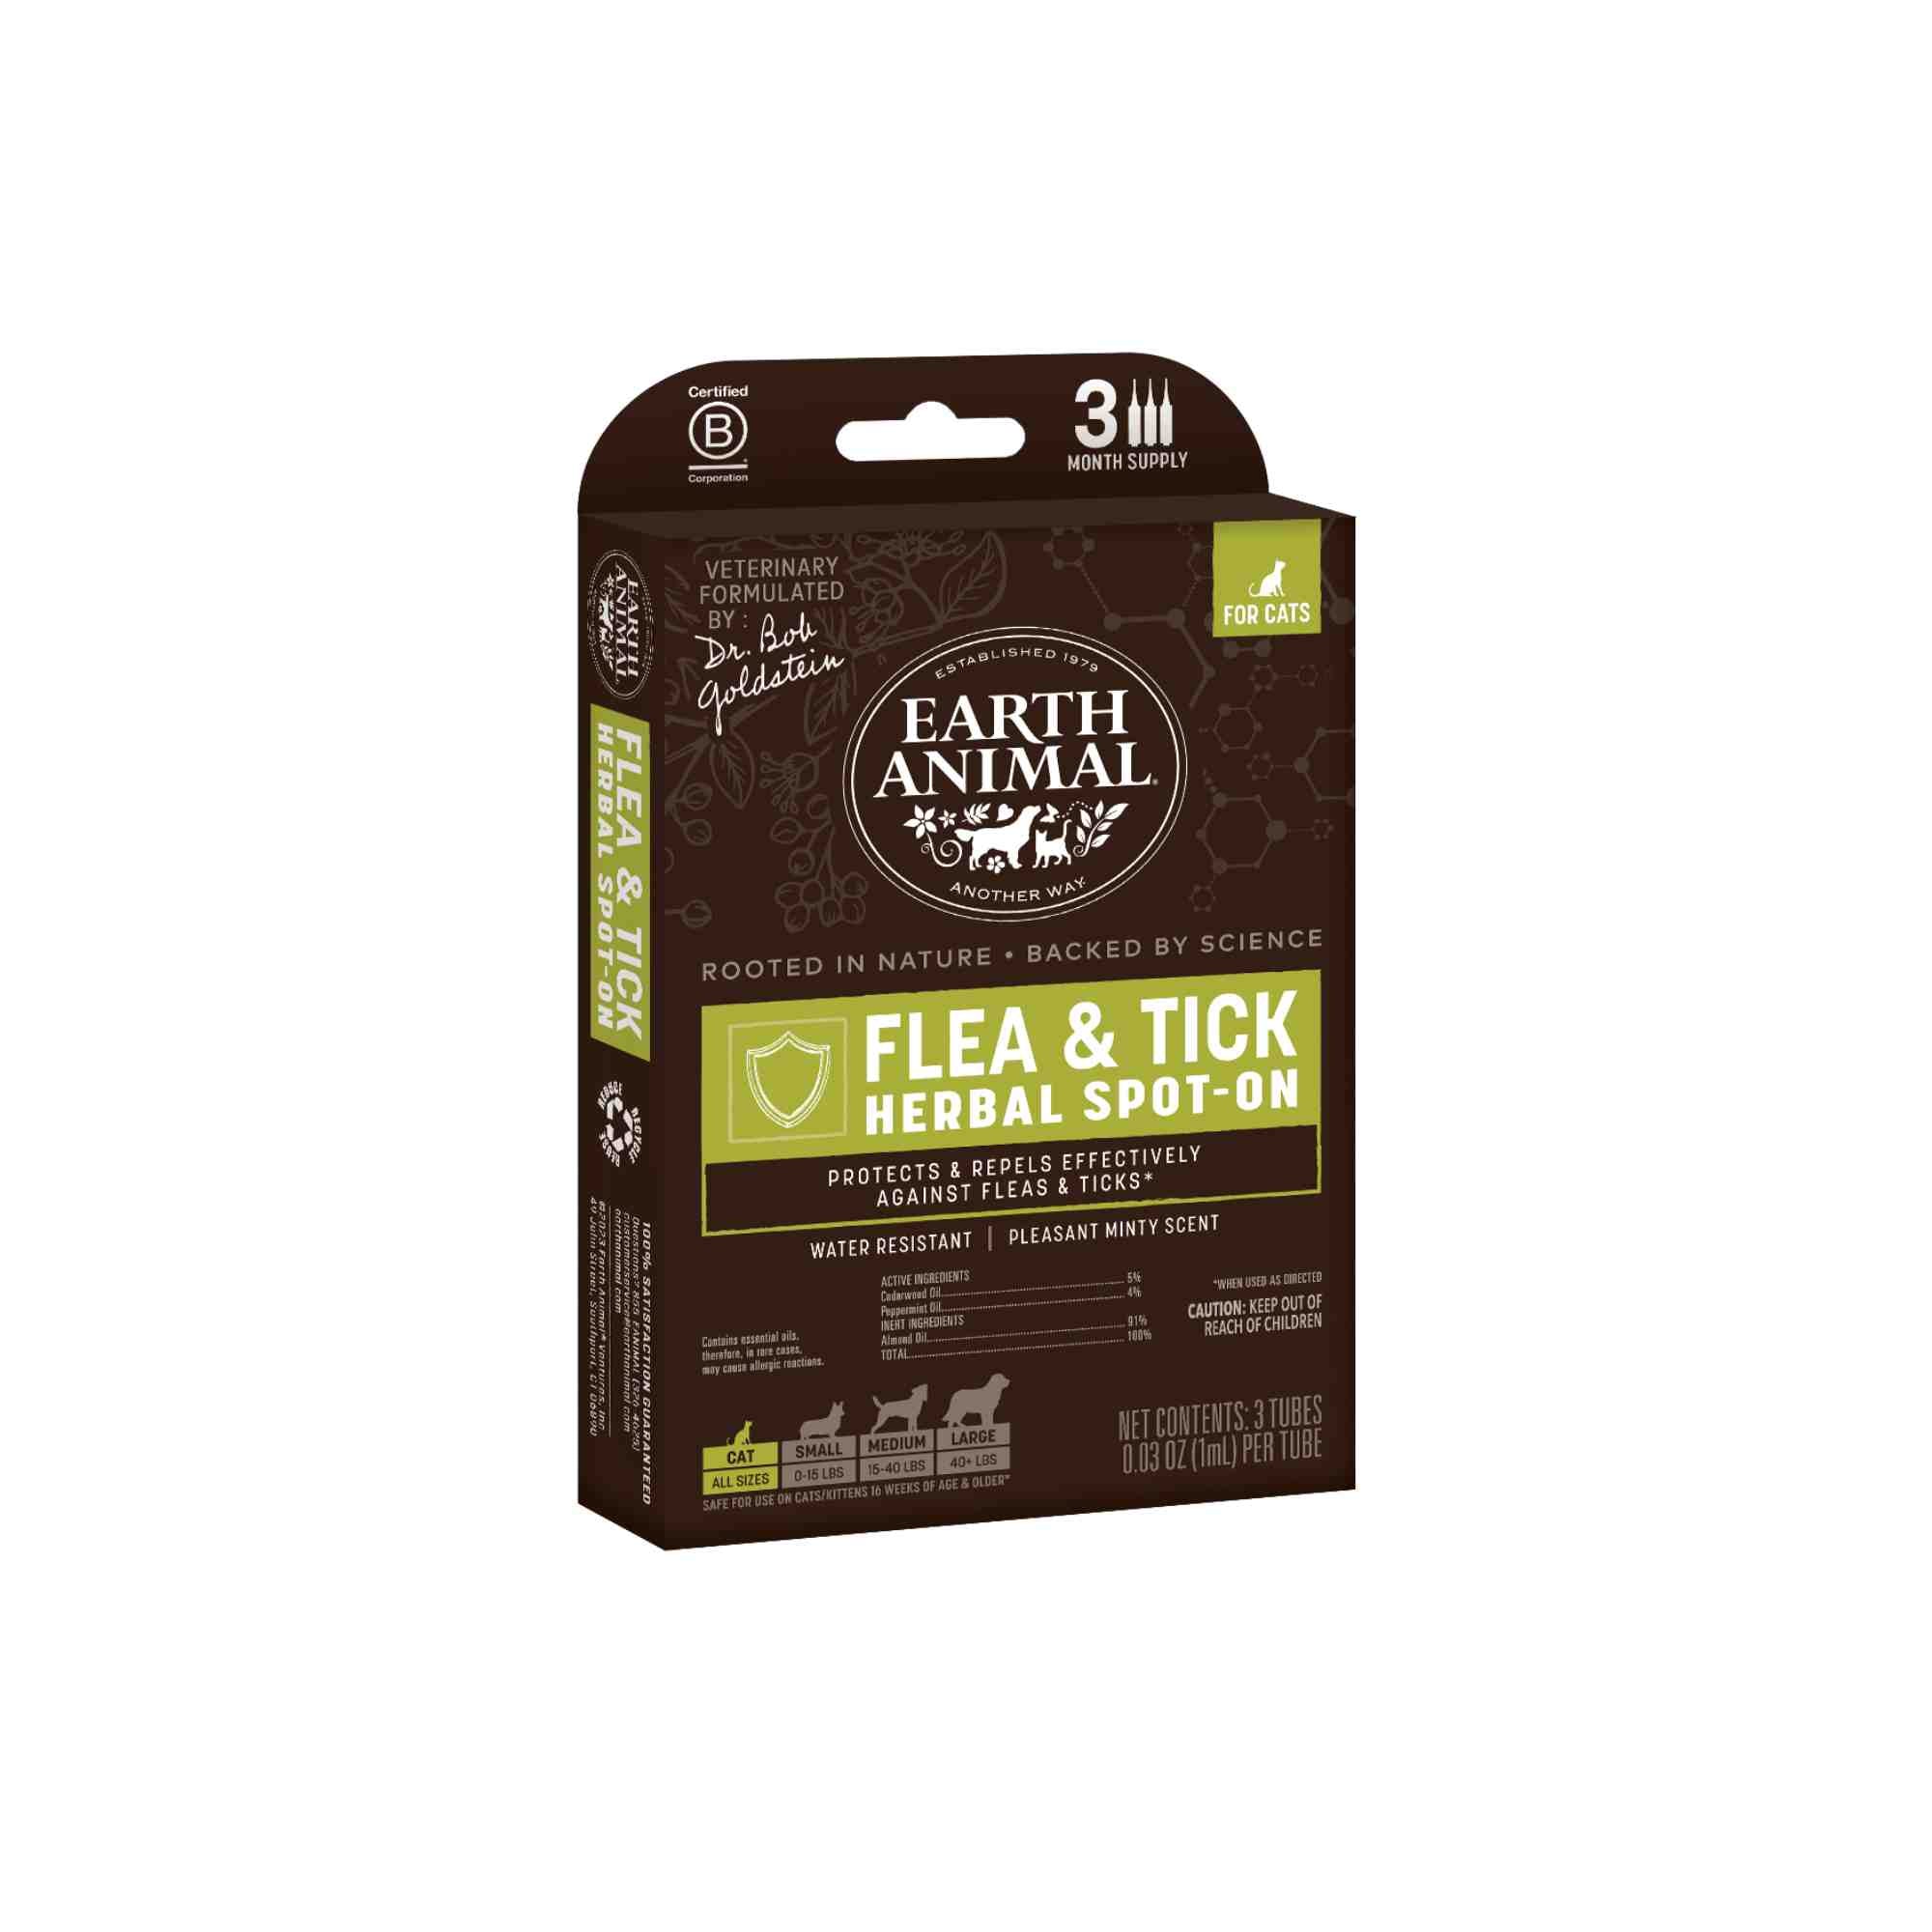 Herbal Flea &amp; Tick Spot-On by Earth Animal for Cats - front of box in side angle